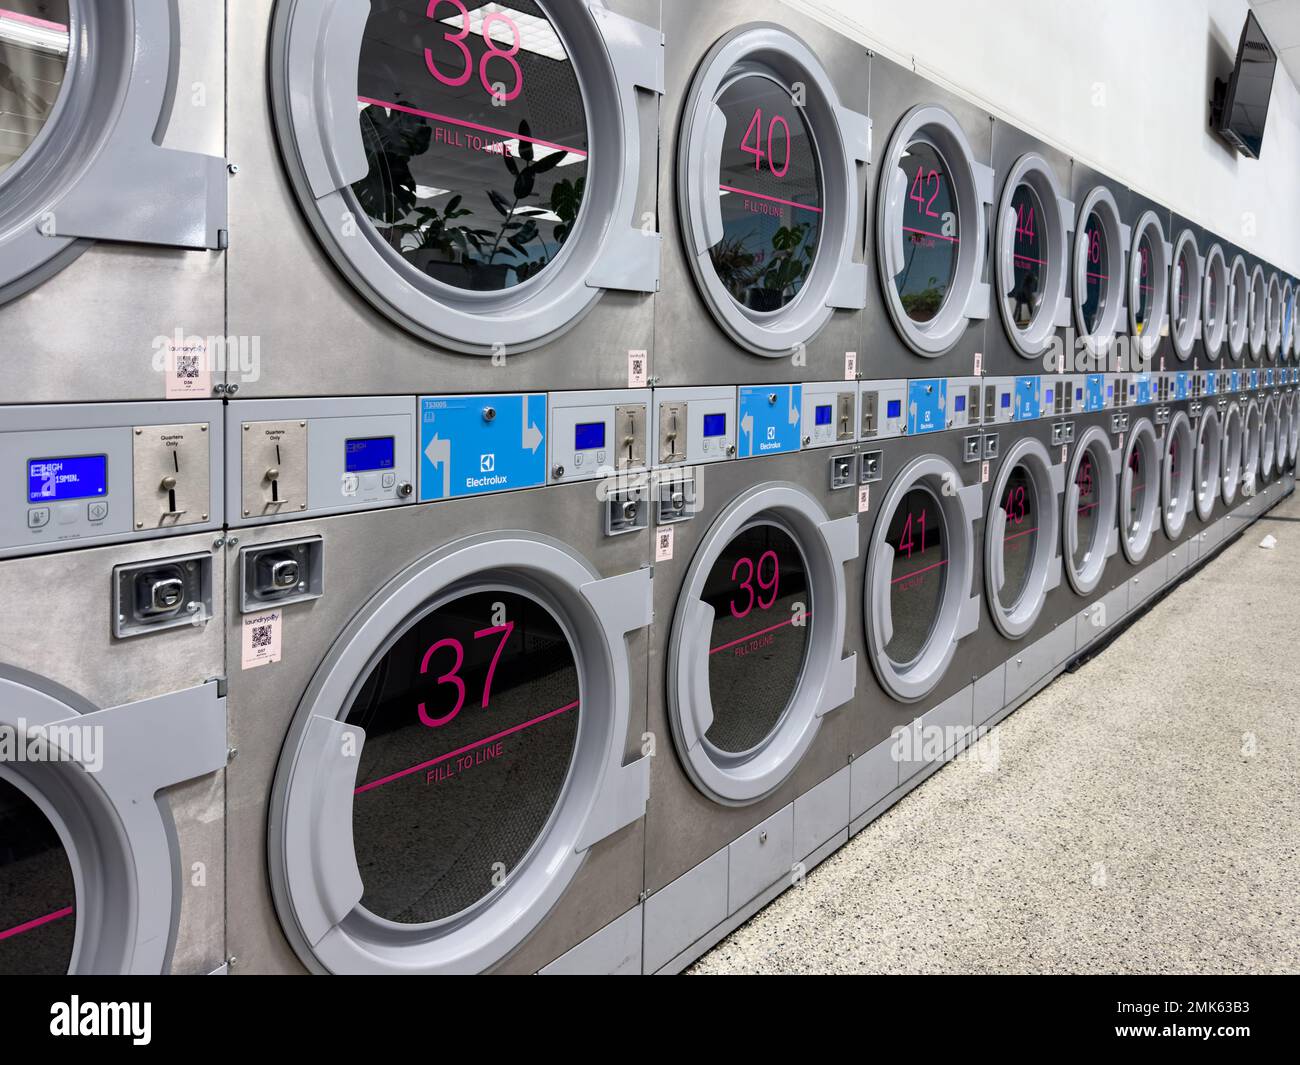 Coin laundry shop with washing machines Stock Photo